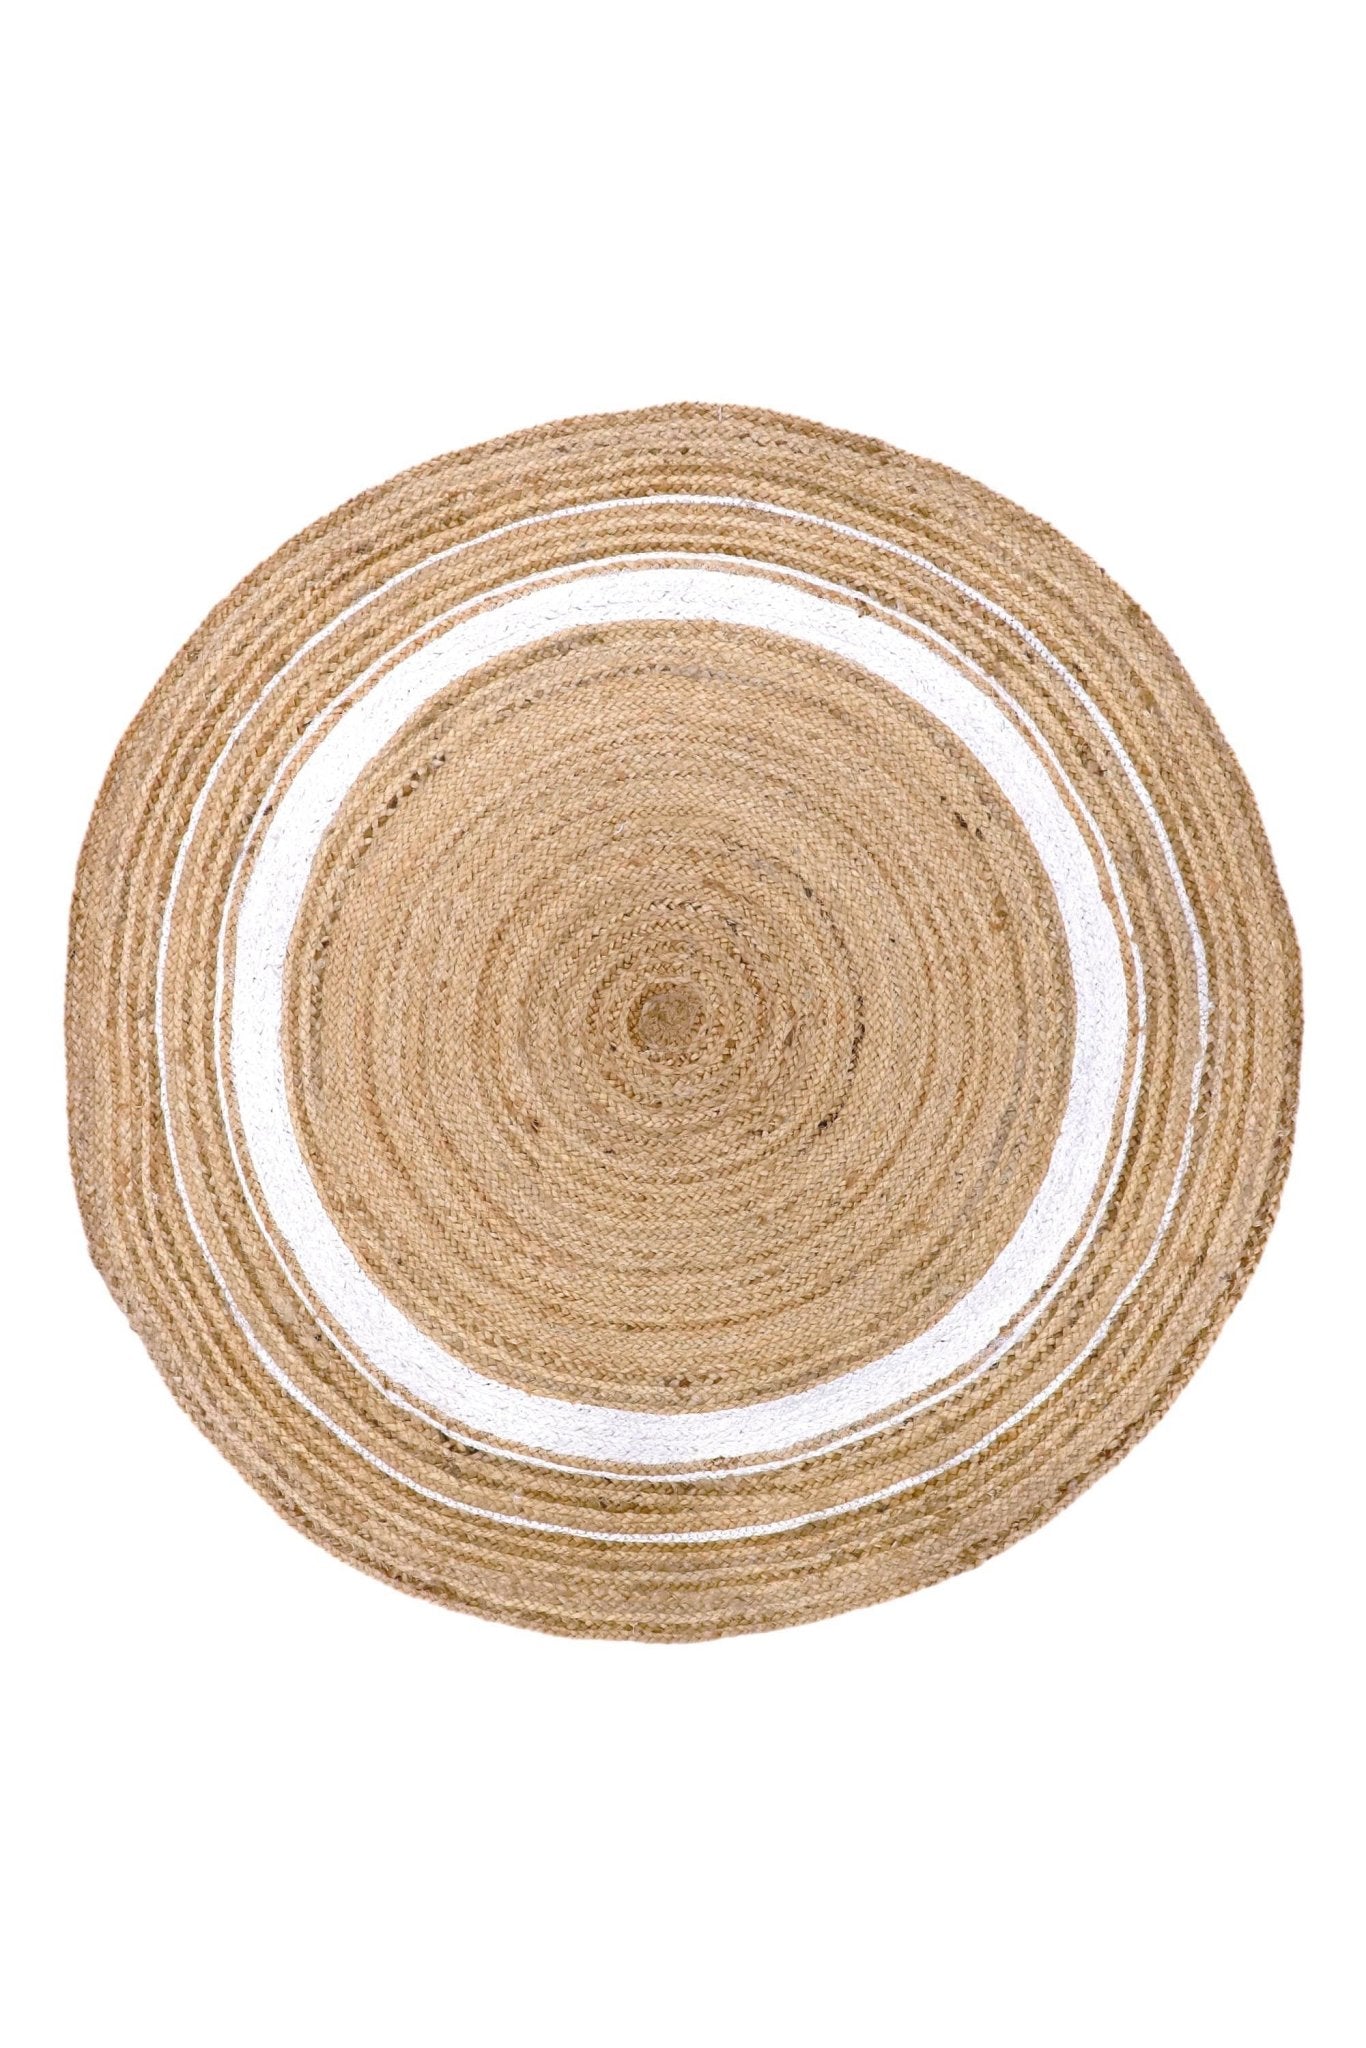 IN -ROUND RUG -NATURAL - ART AVENUE